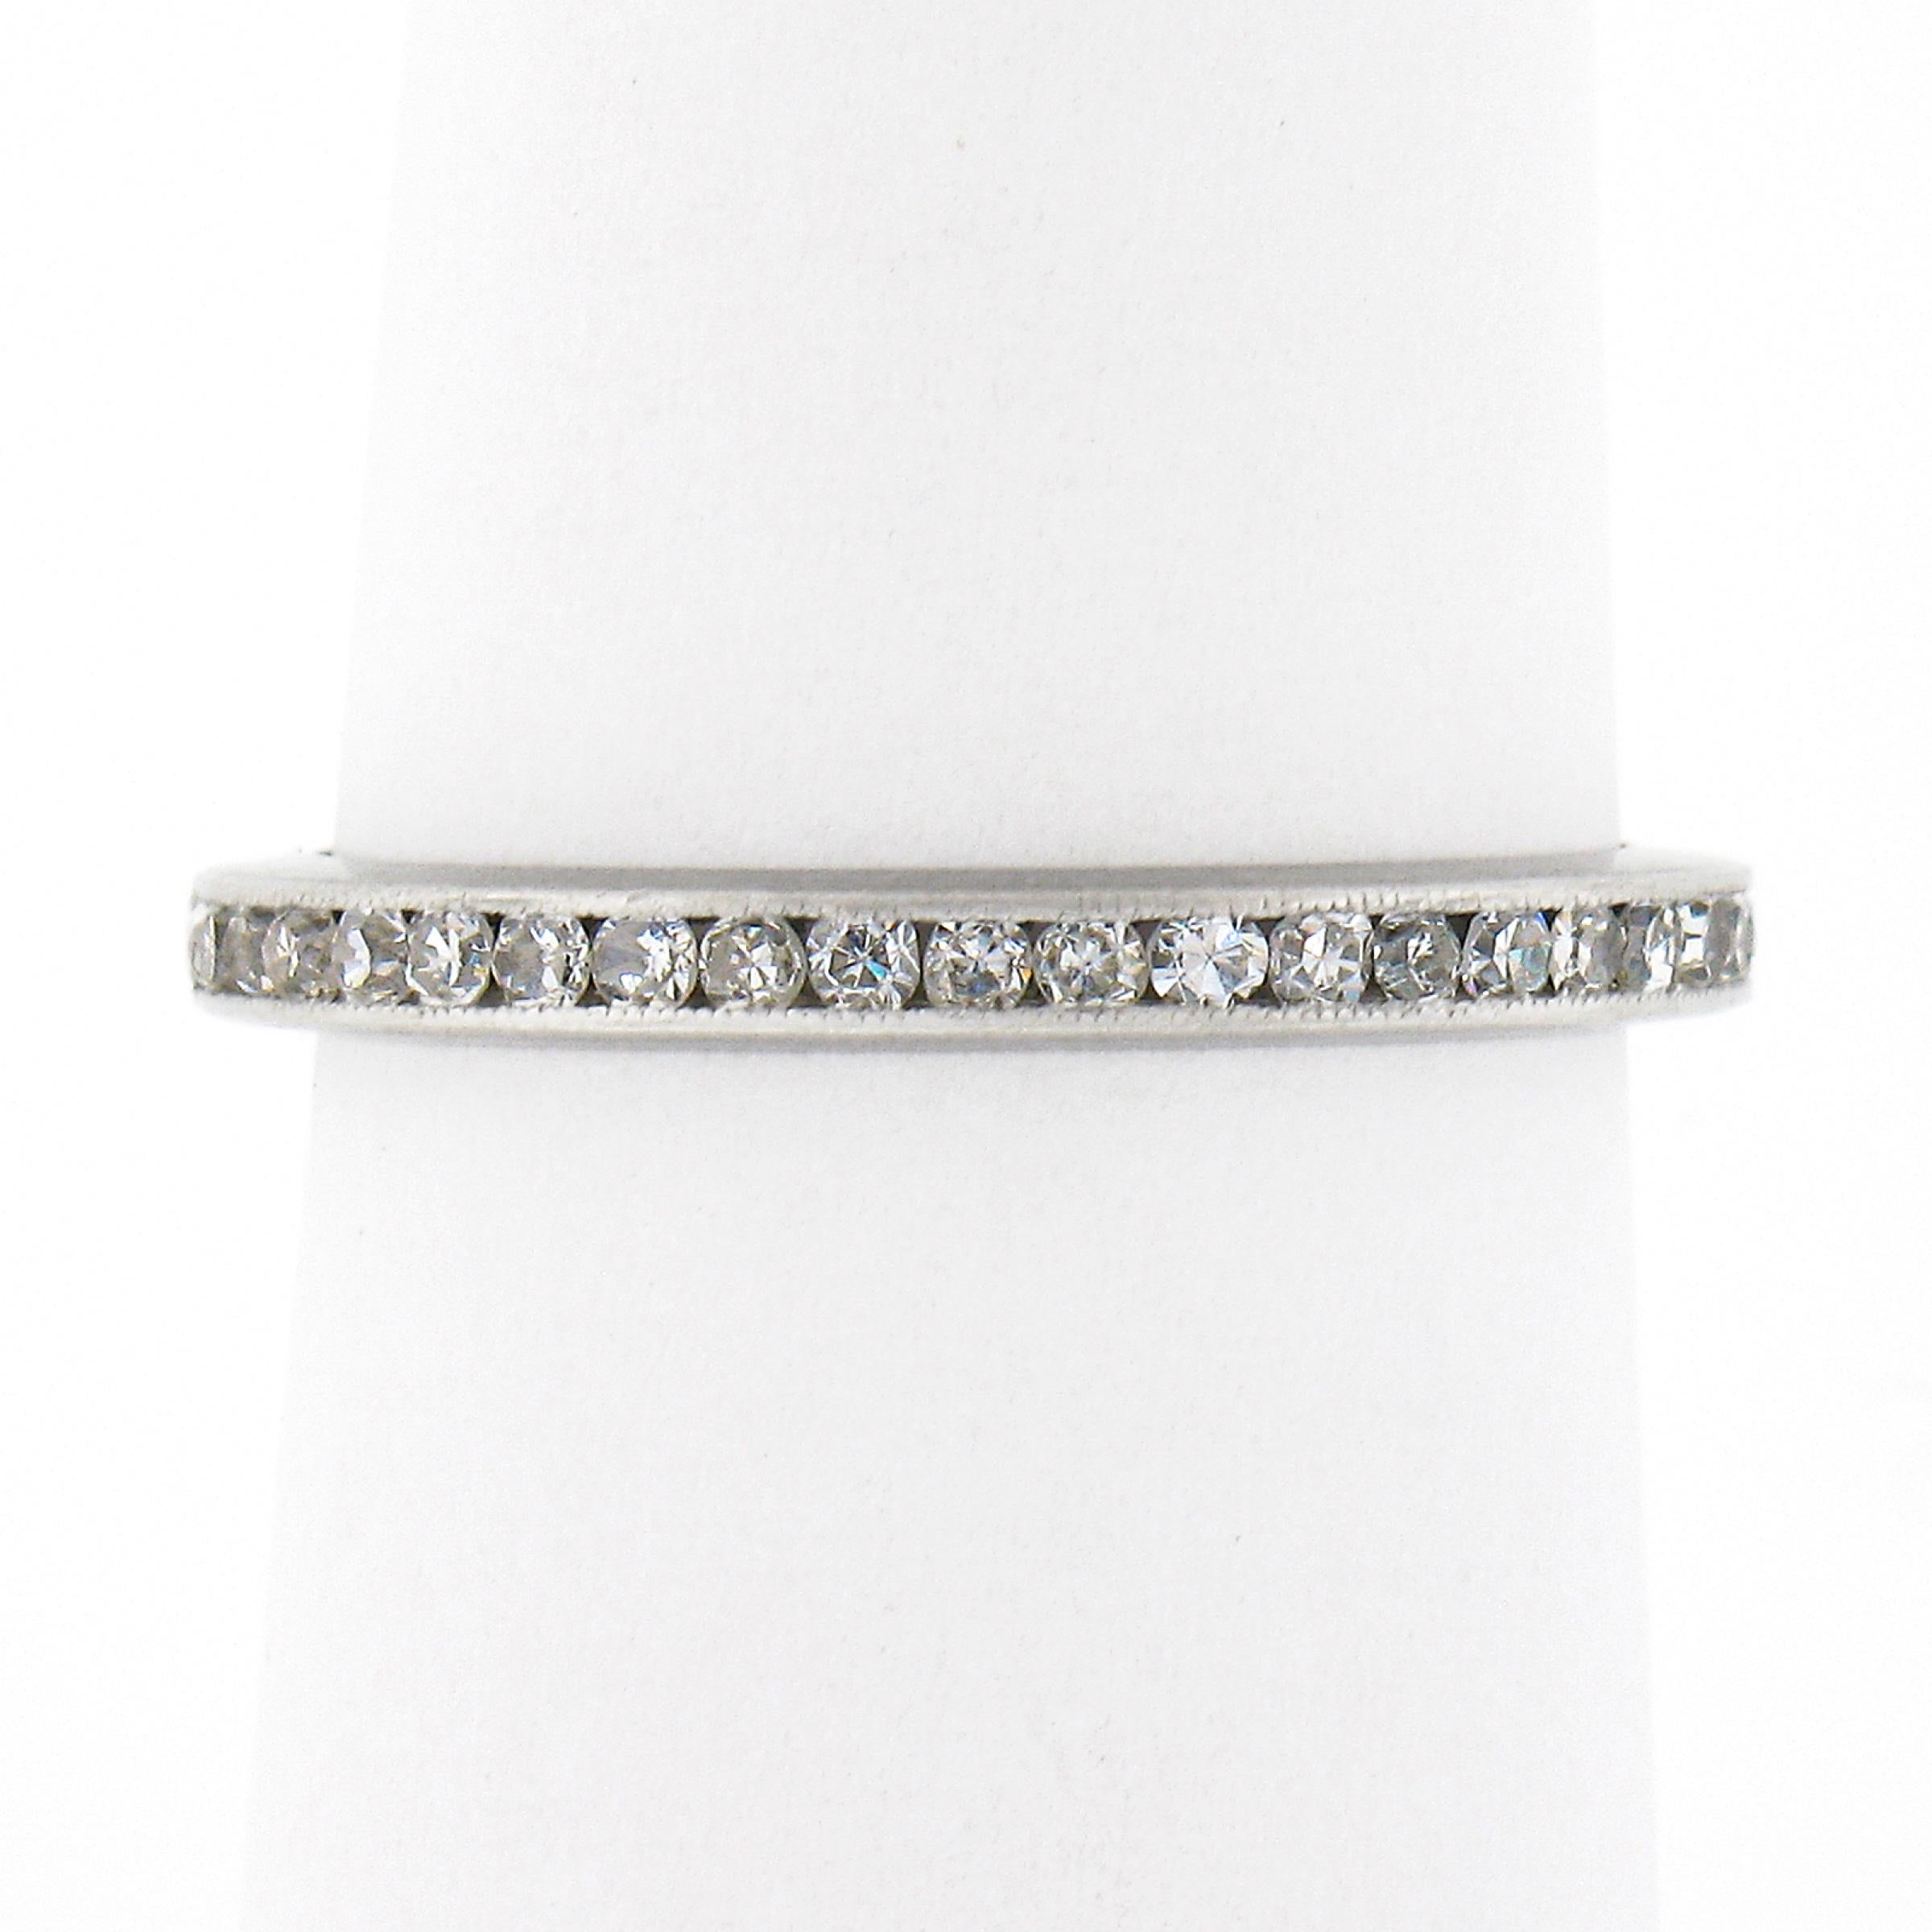 This gorgeous and well made antique diamond eternity band ring was crafted from solid .900 platinum during the art deco period. It features a simple design that carries very fine and super fiery old single cut diamonds that are neatly channel set